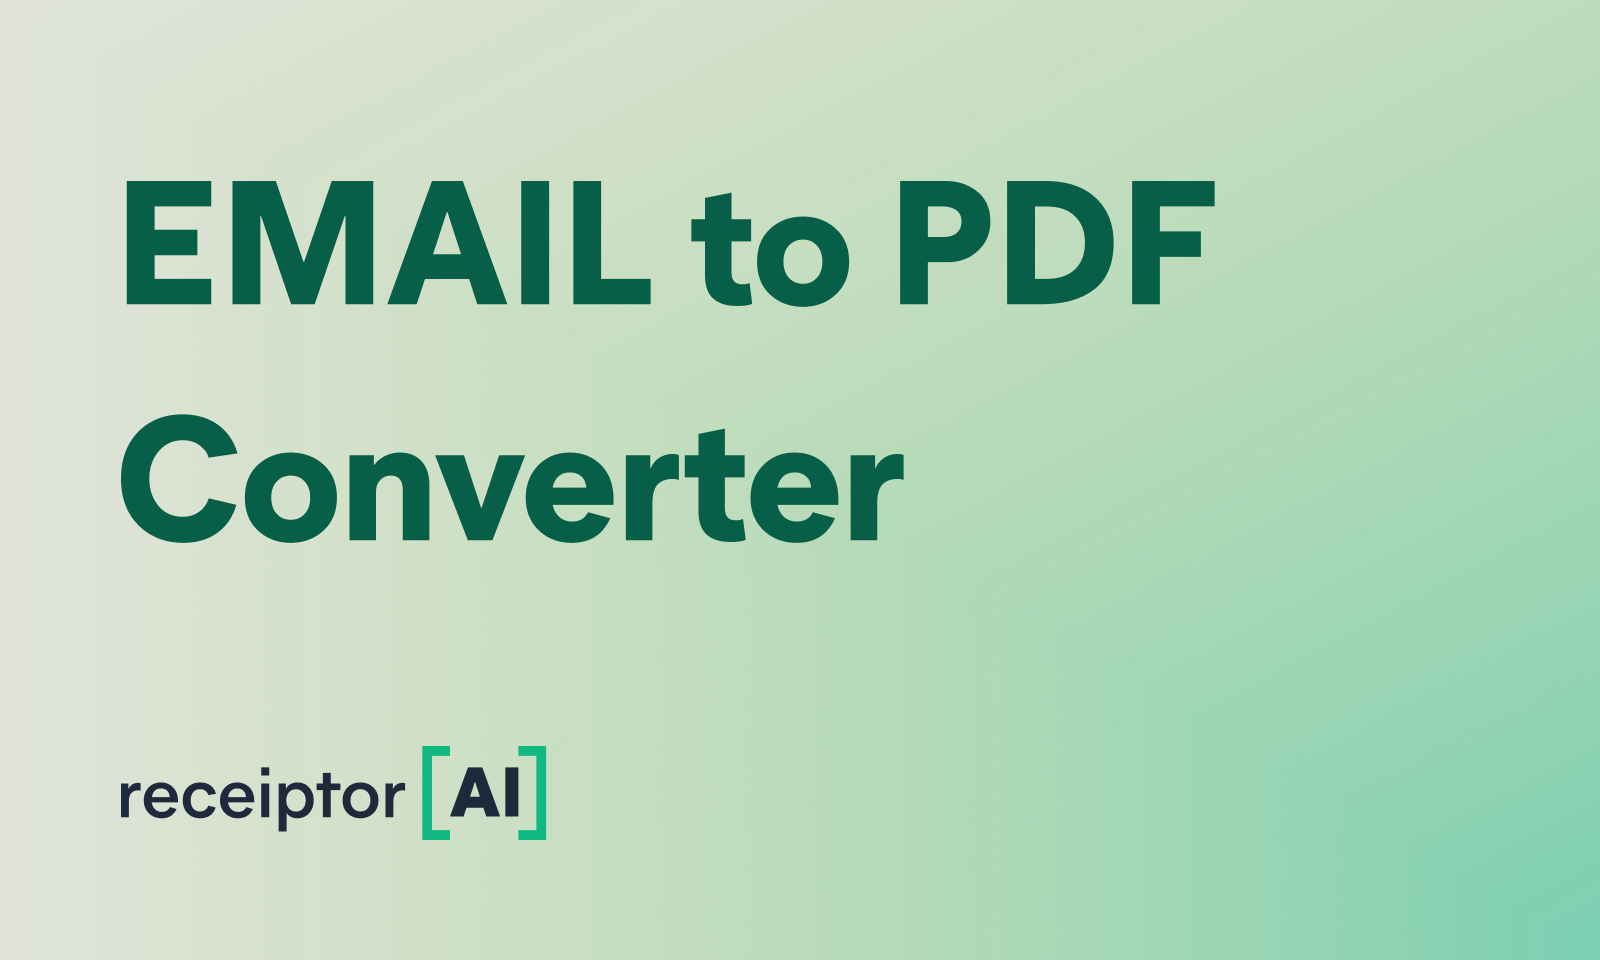 EMAIL to PDF Converter